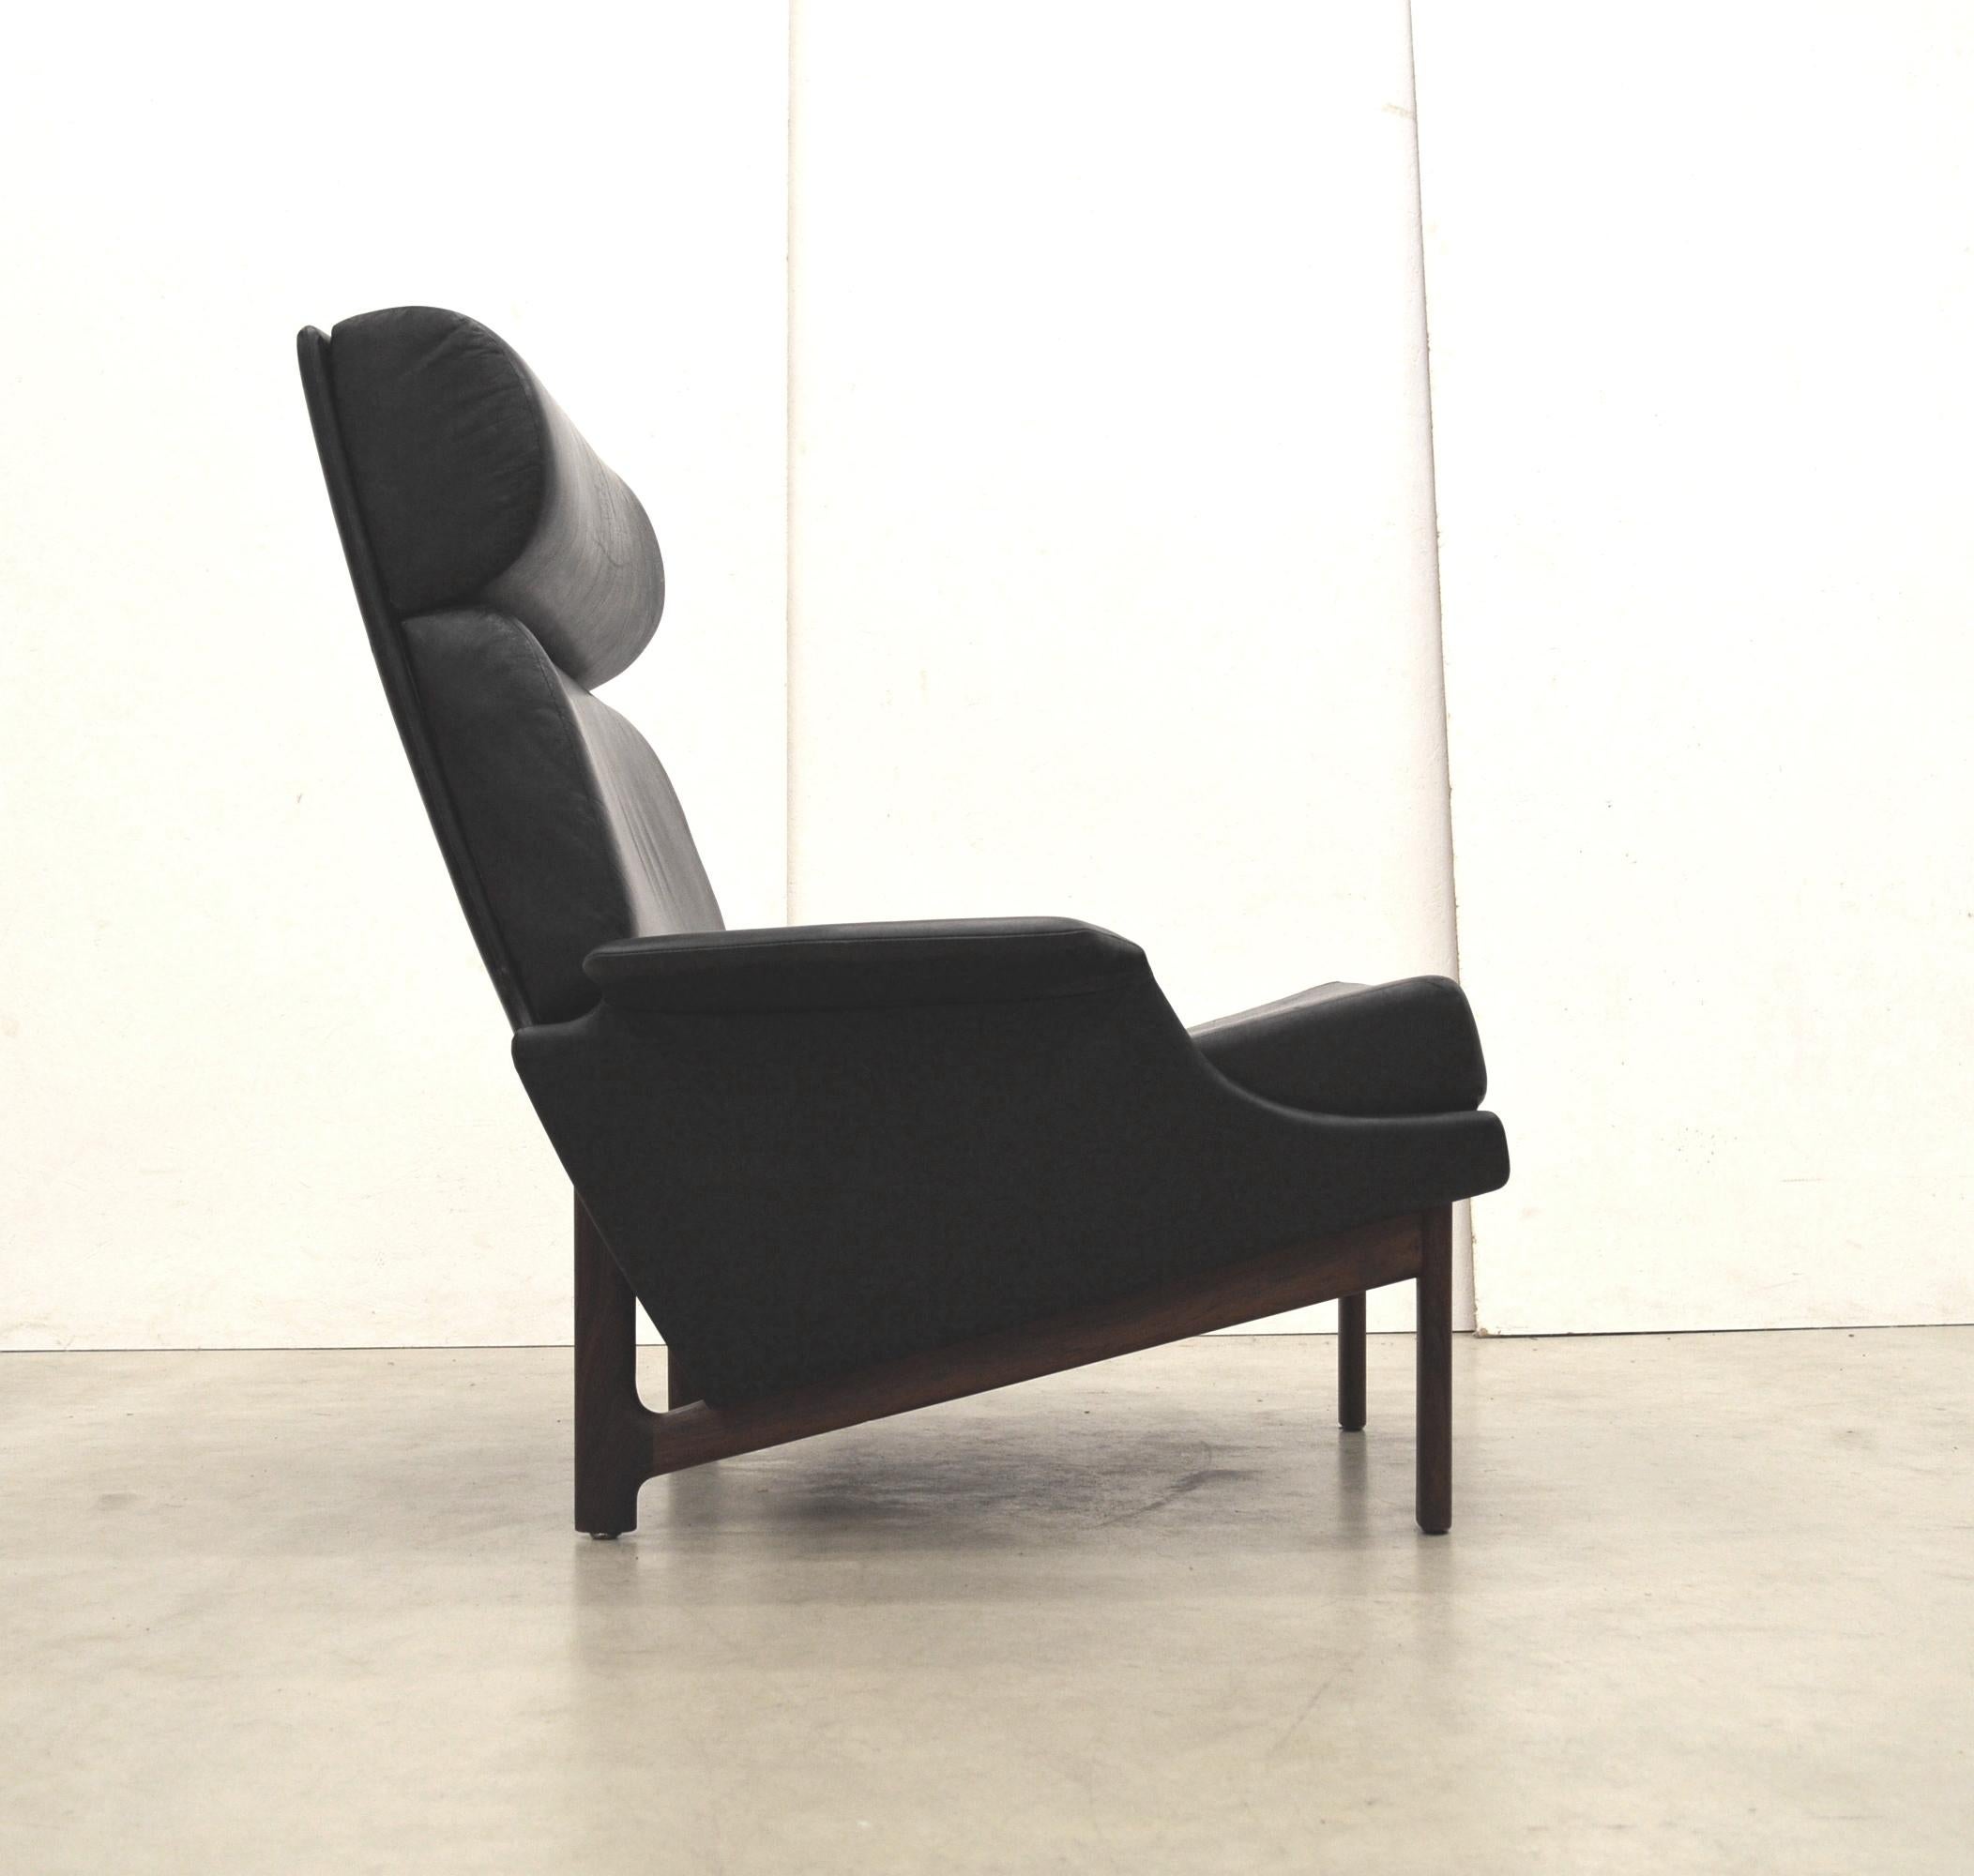 Rare Adam chair by IB Kofod Larsen for Mogens Kold Mobelfabrik Denmark.
Designed in 1958 and produced in the early 1960s.

Early edition with wonderful black leather upholstery and amazing rosewood base.
Timeless and very comfortable